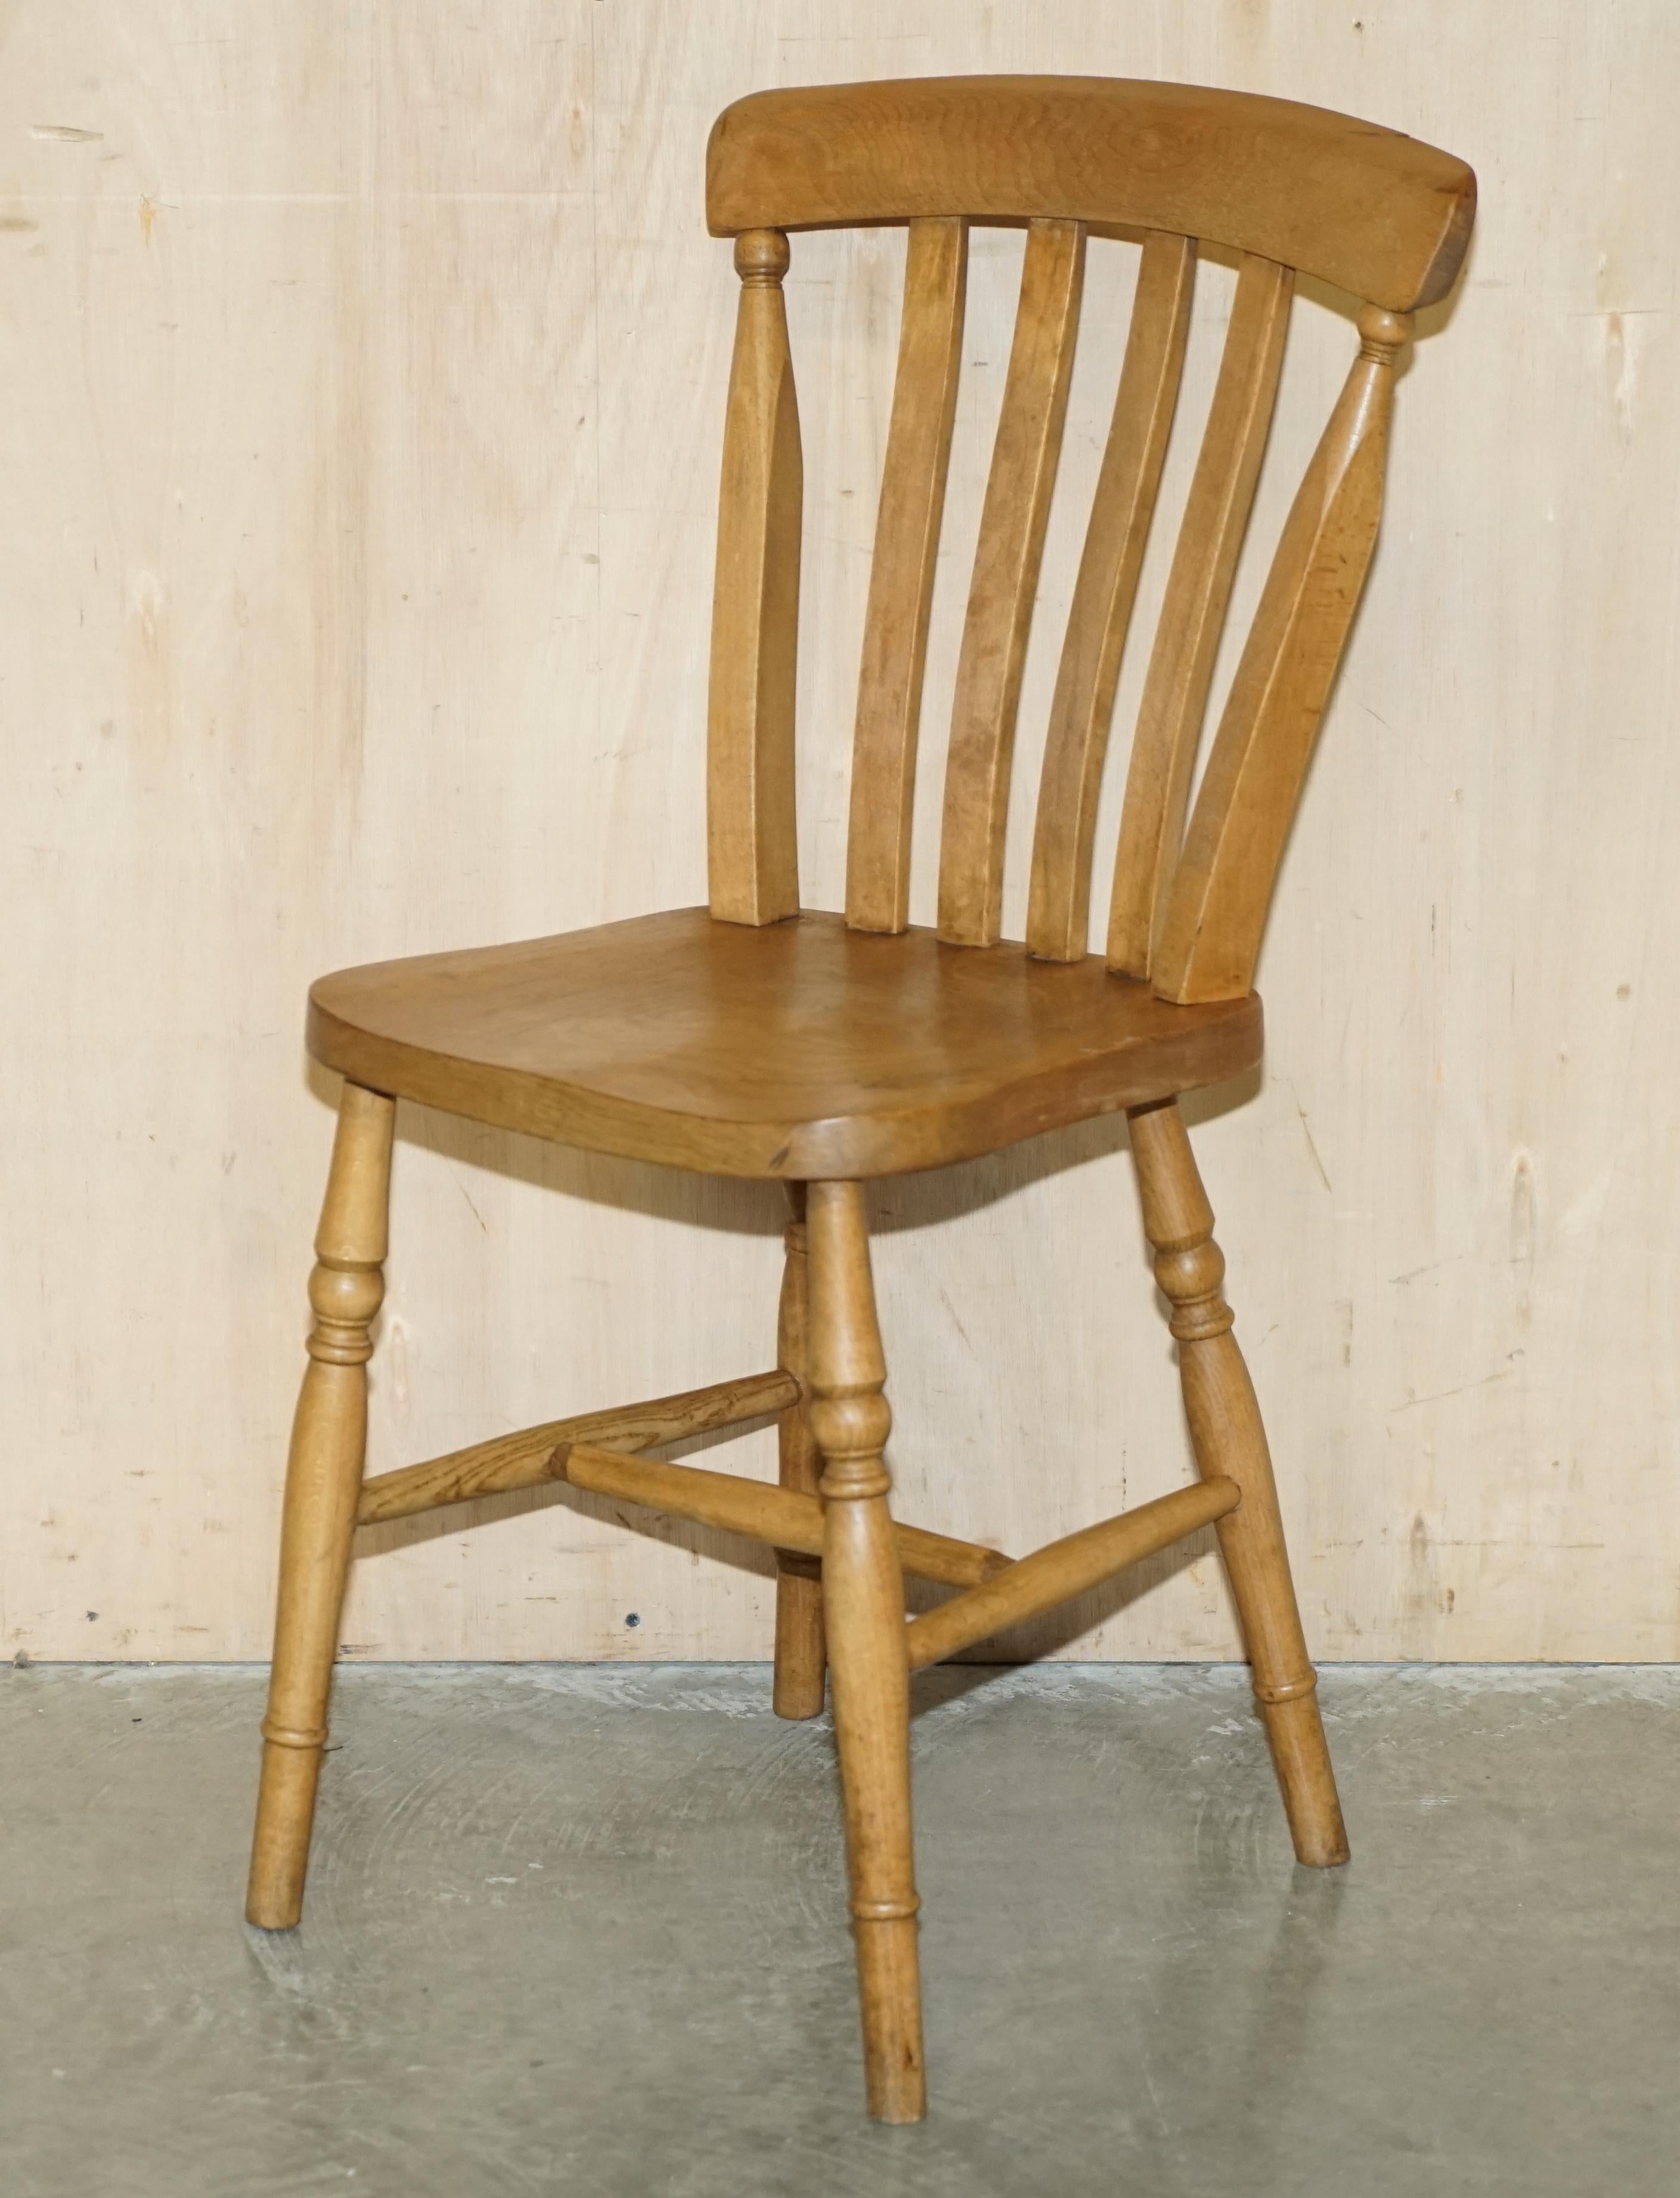 Royal House Antiques

Royal House Antiques is delighted to offer for sale this lovely suite of six, hand made in England circa 1900 English oak country house dining chairs 

Please note the delivery fee listed is just a guide, it covers within the